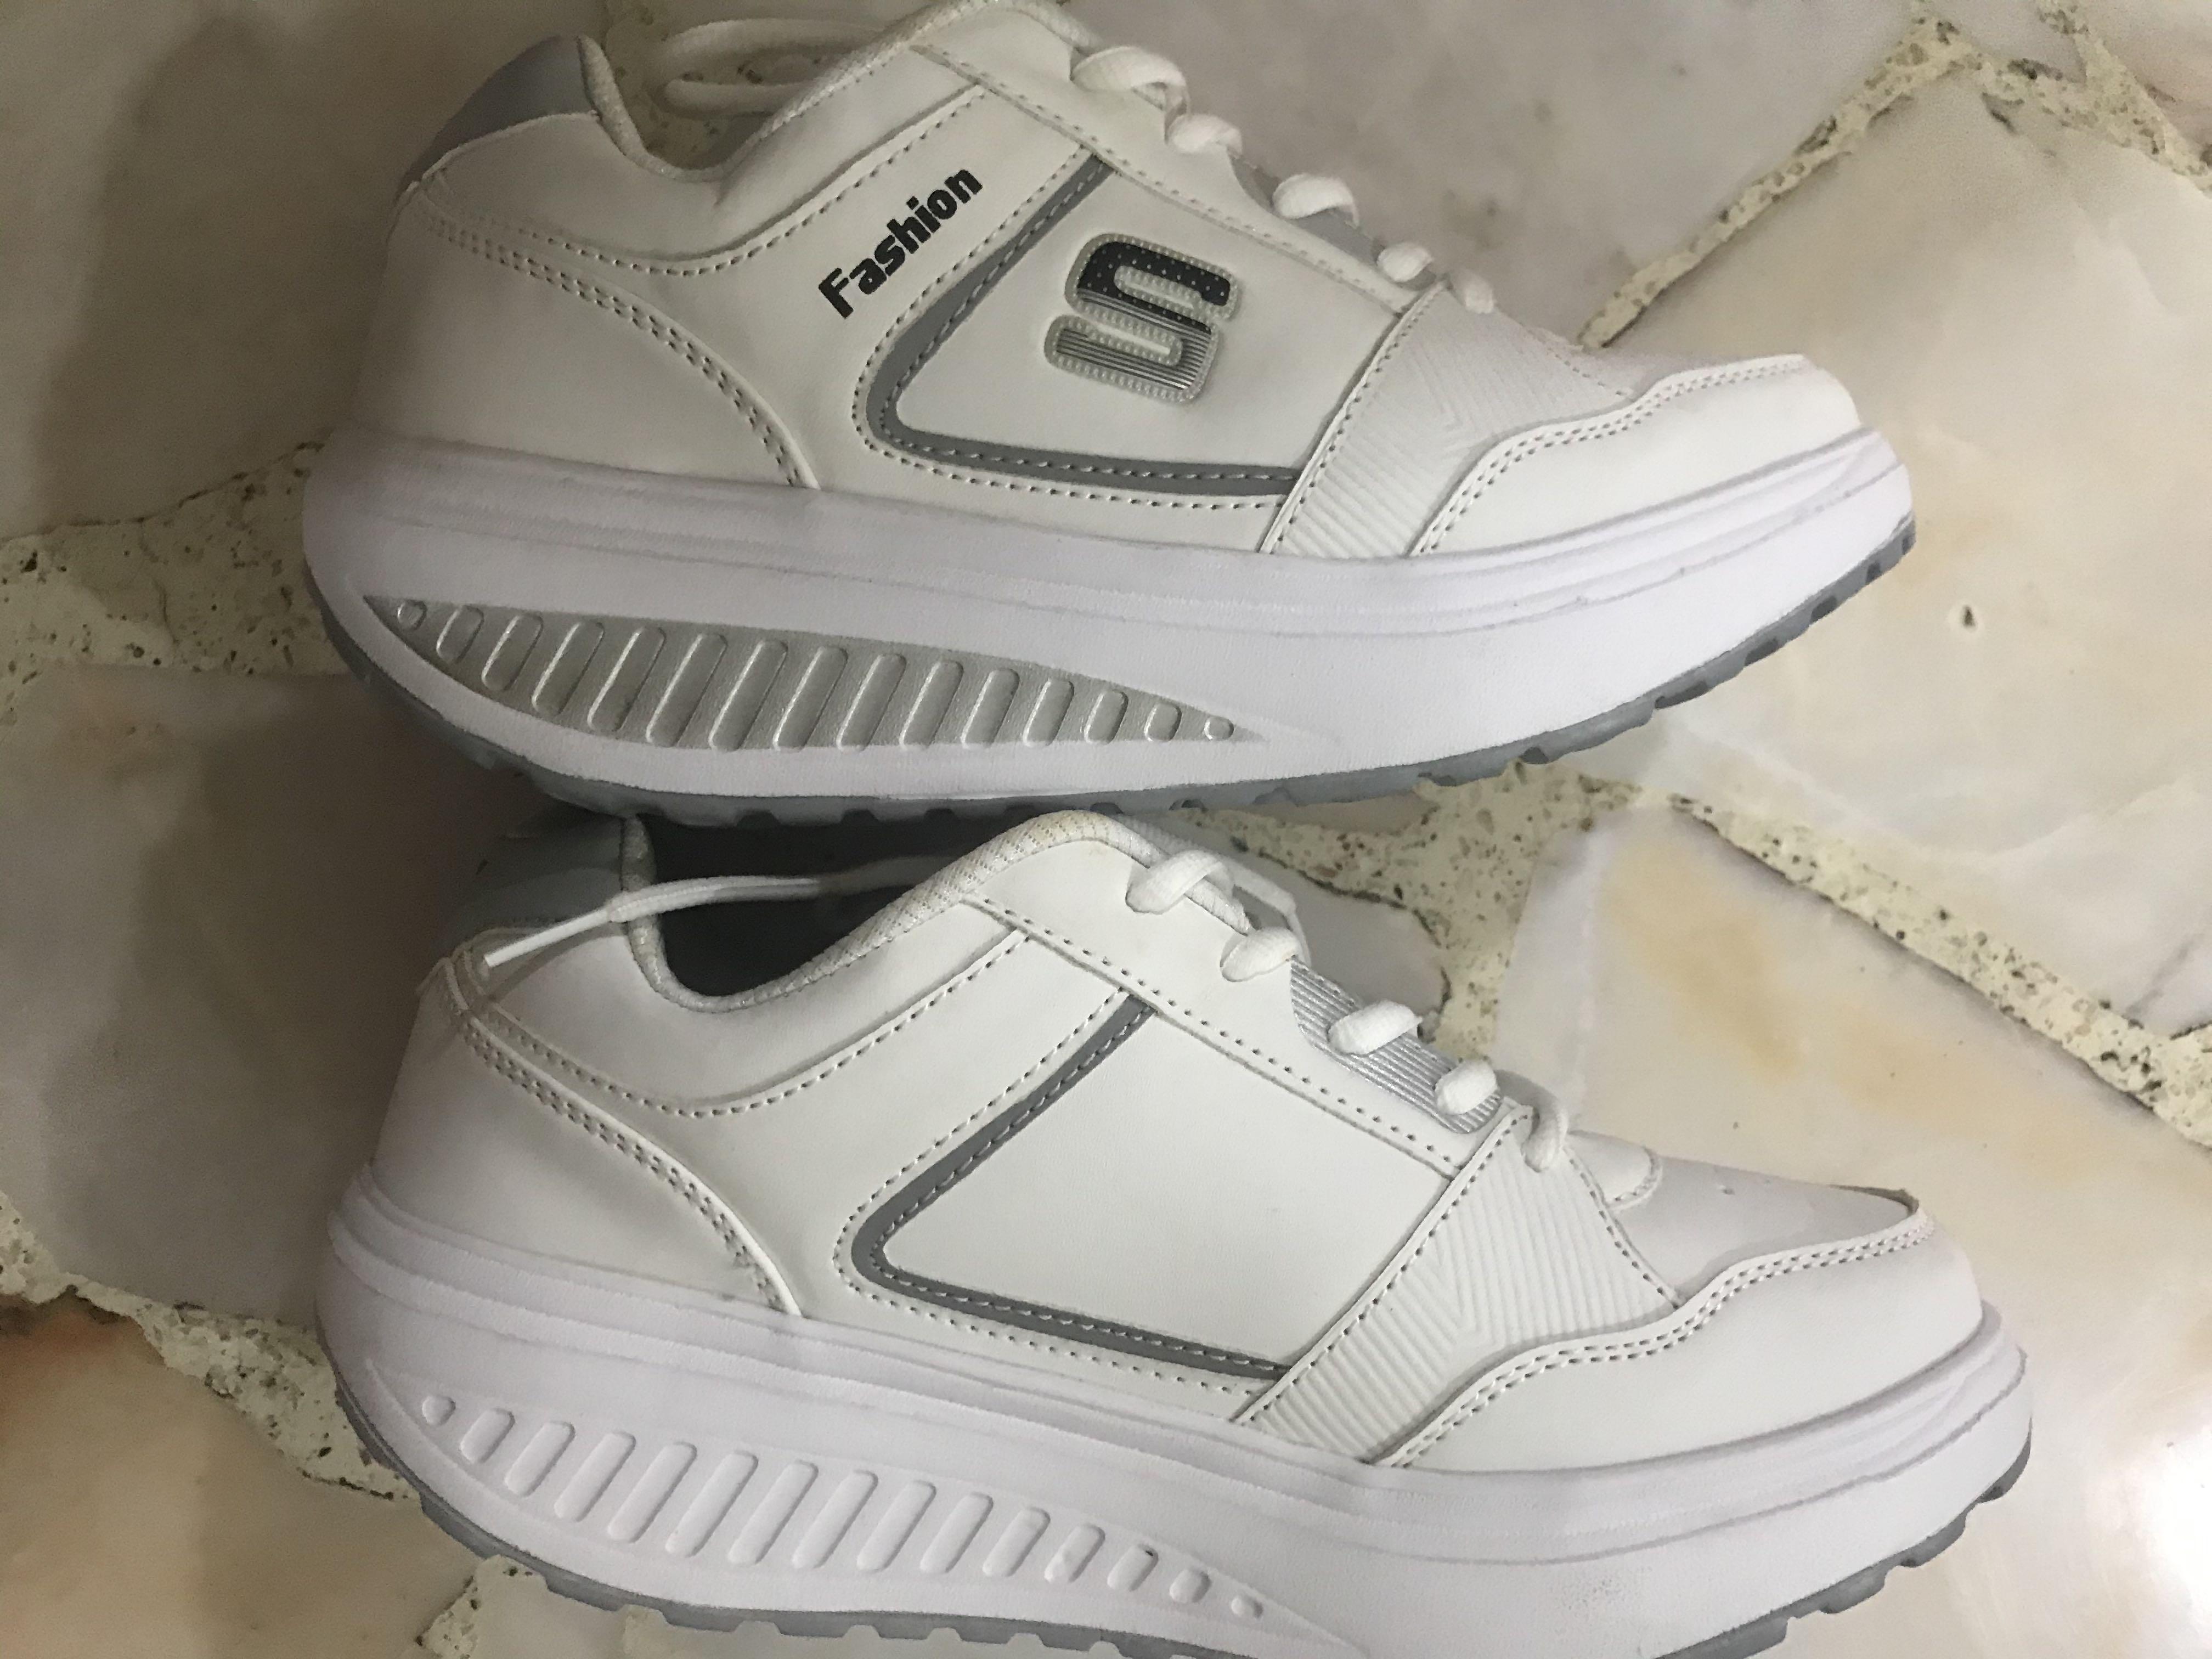 School shoes / Sneakers Brand New 